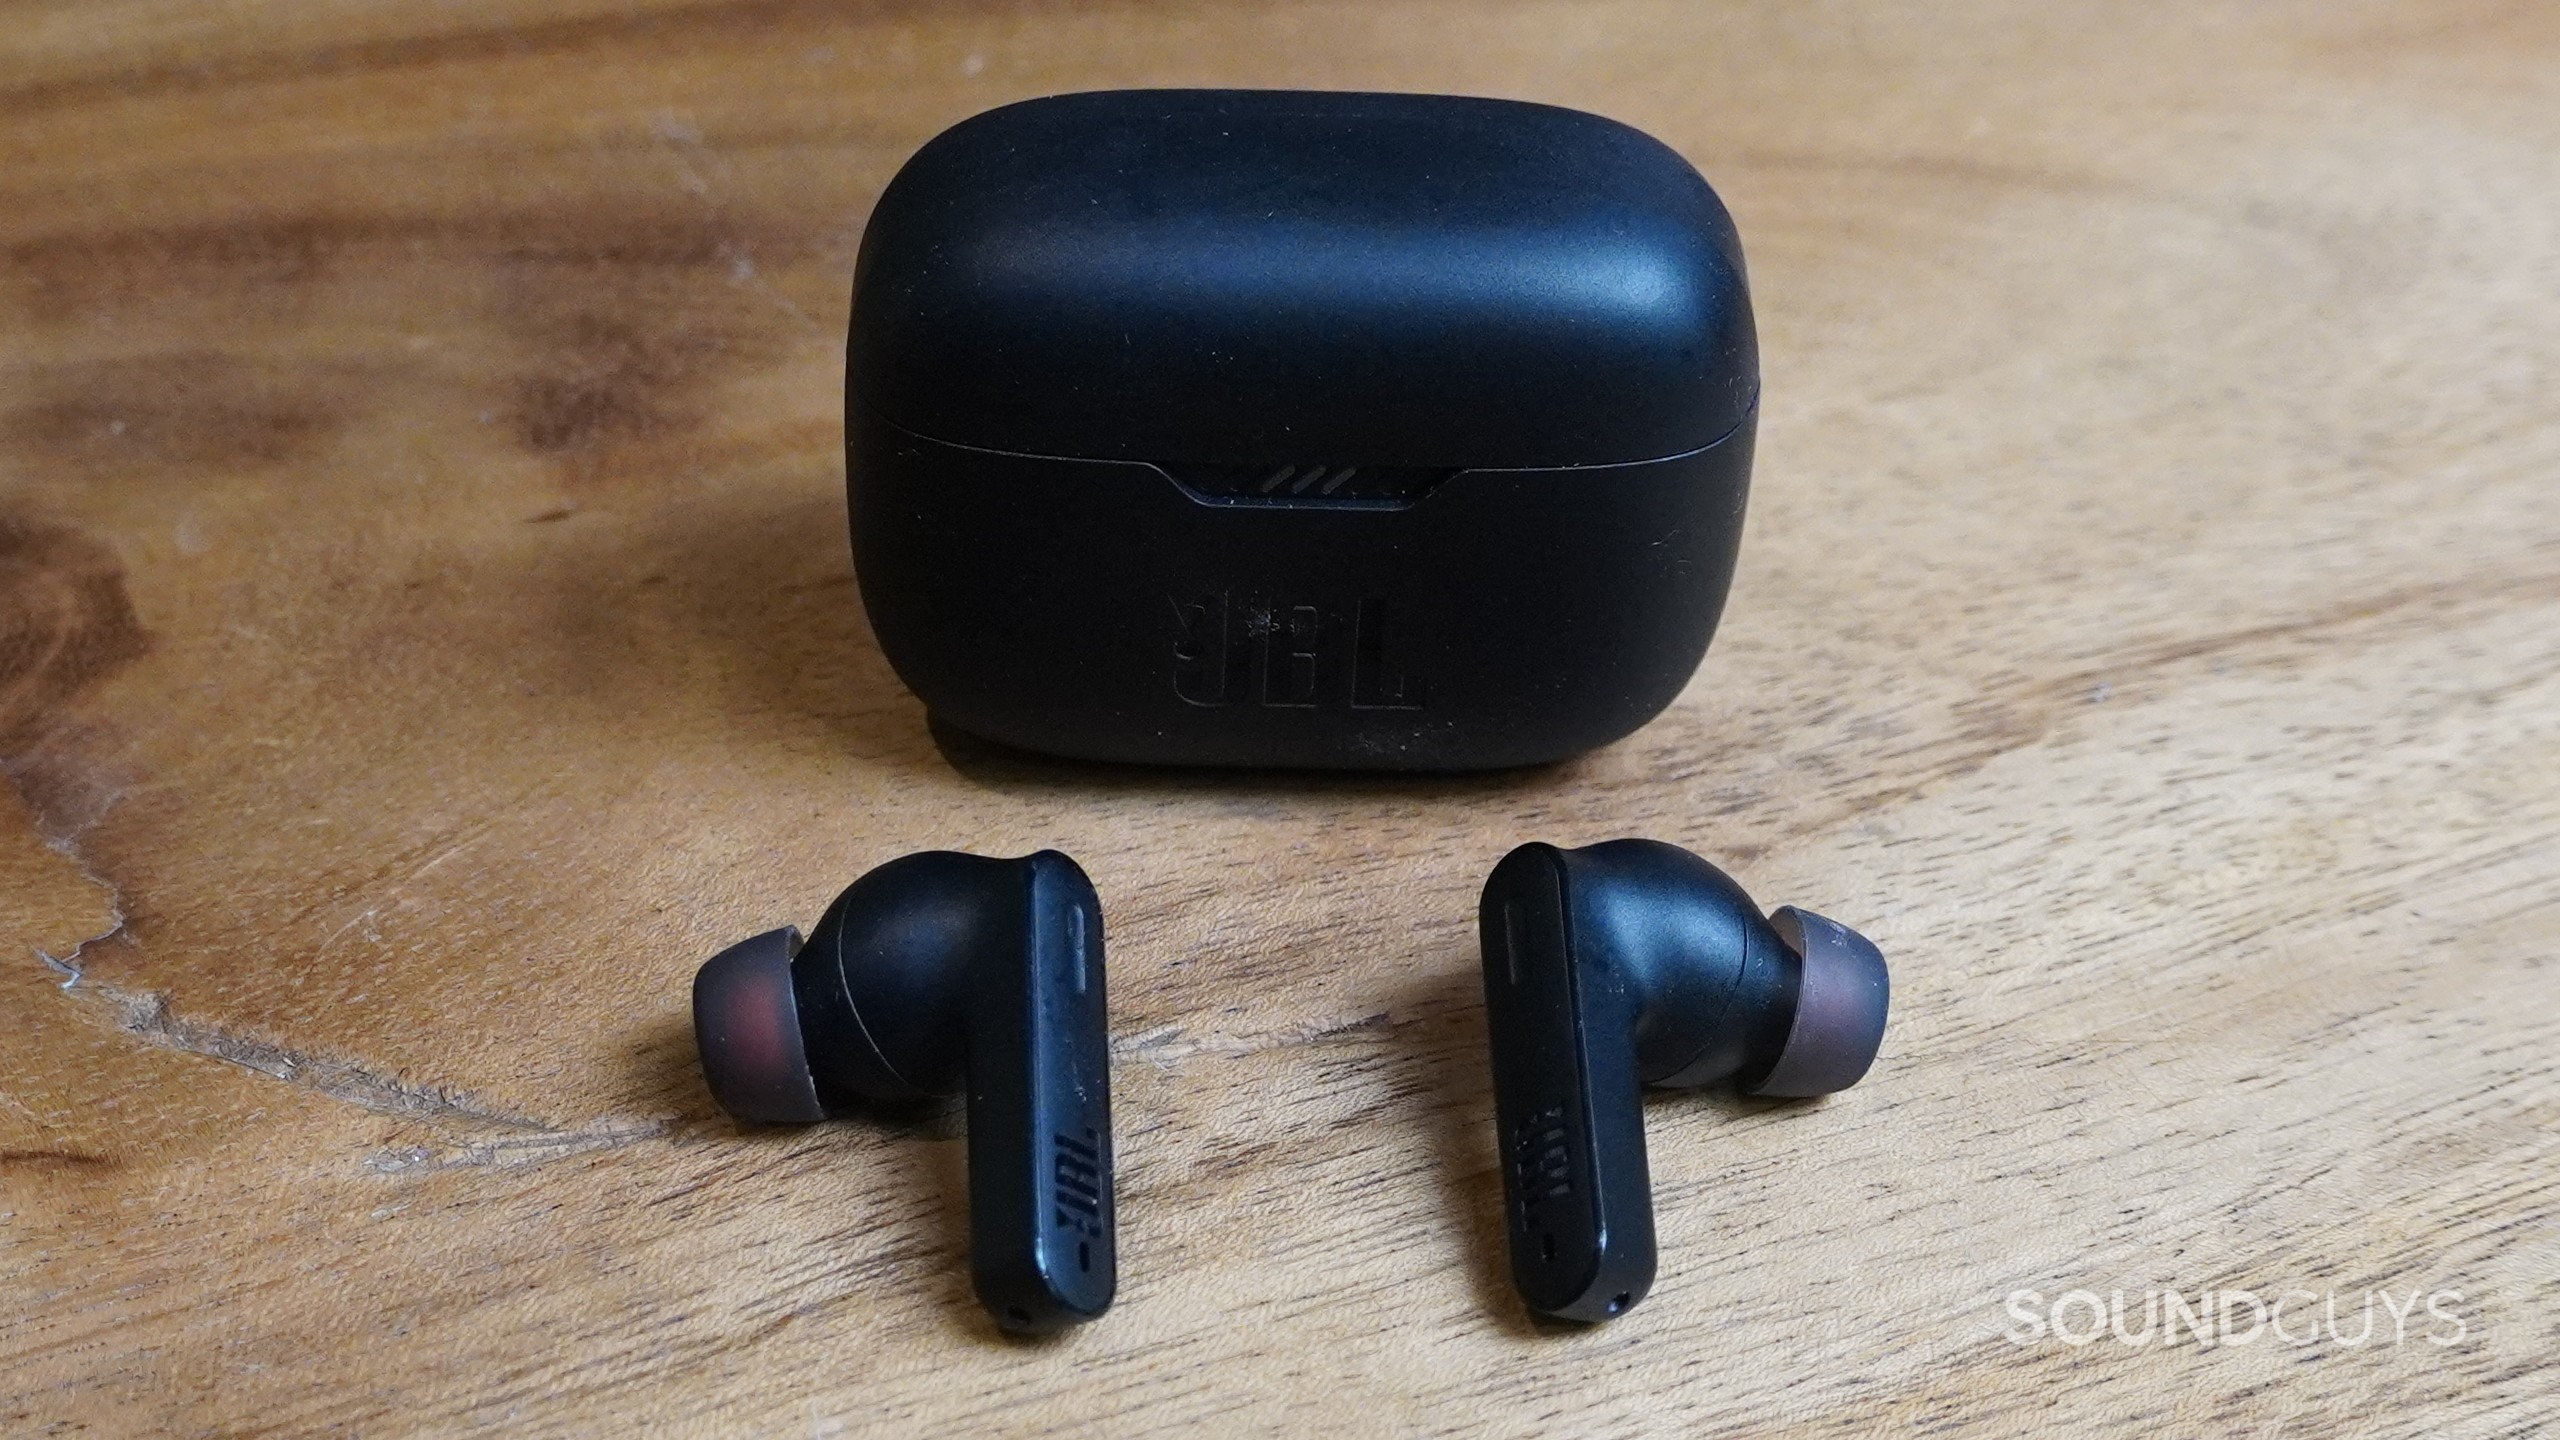 The JBL Tunes 230NC TWS earbuds shown outside and next to the charging case on a wooden surface.